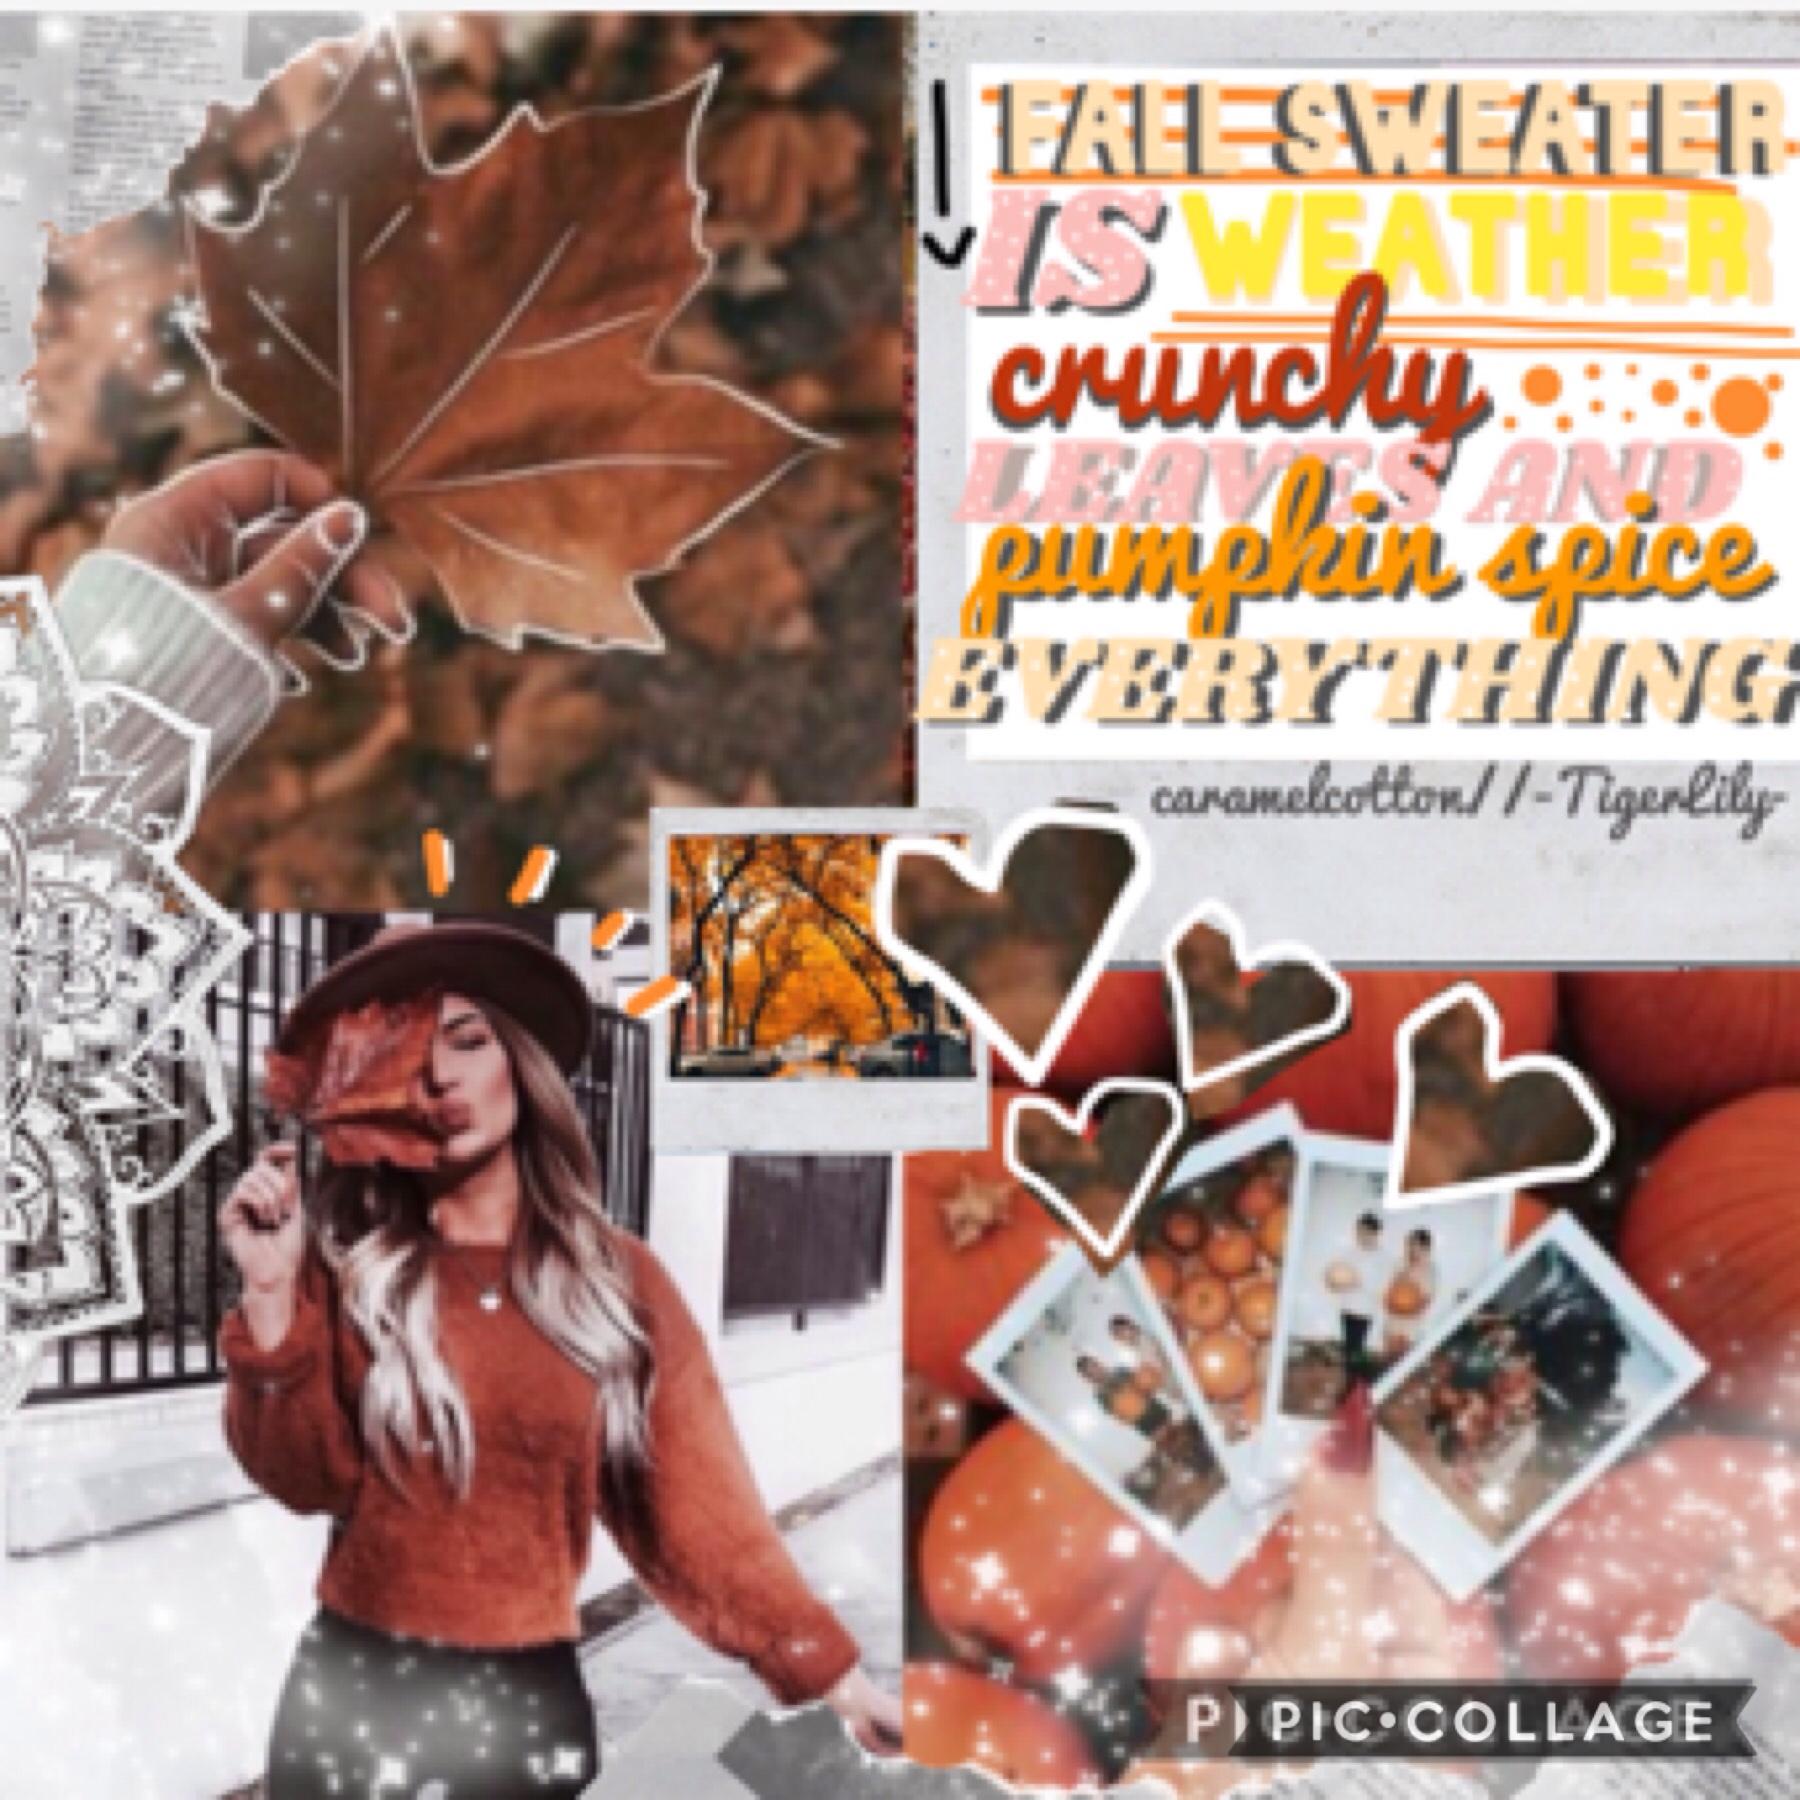 🌷collab with....🌷
-TigerLily-! She chose quote and I did background and text 💞

Did 11km walk legs are falling off 😴

qotd: are you dressing up 4 Halloween?
aotd: yes as a clown 🎈

sotd: -TigerLily- 🐯